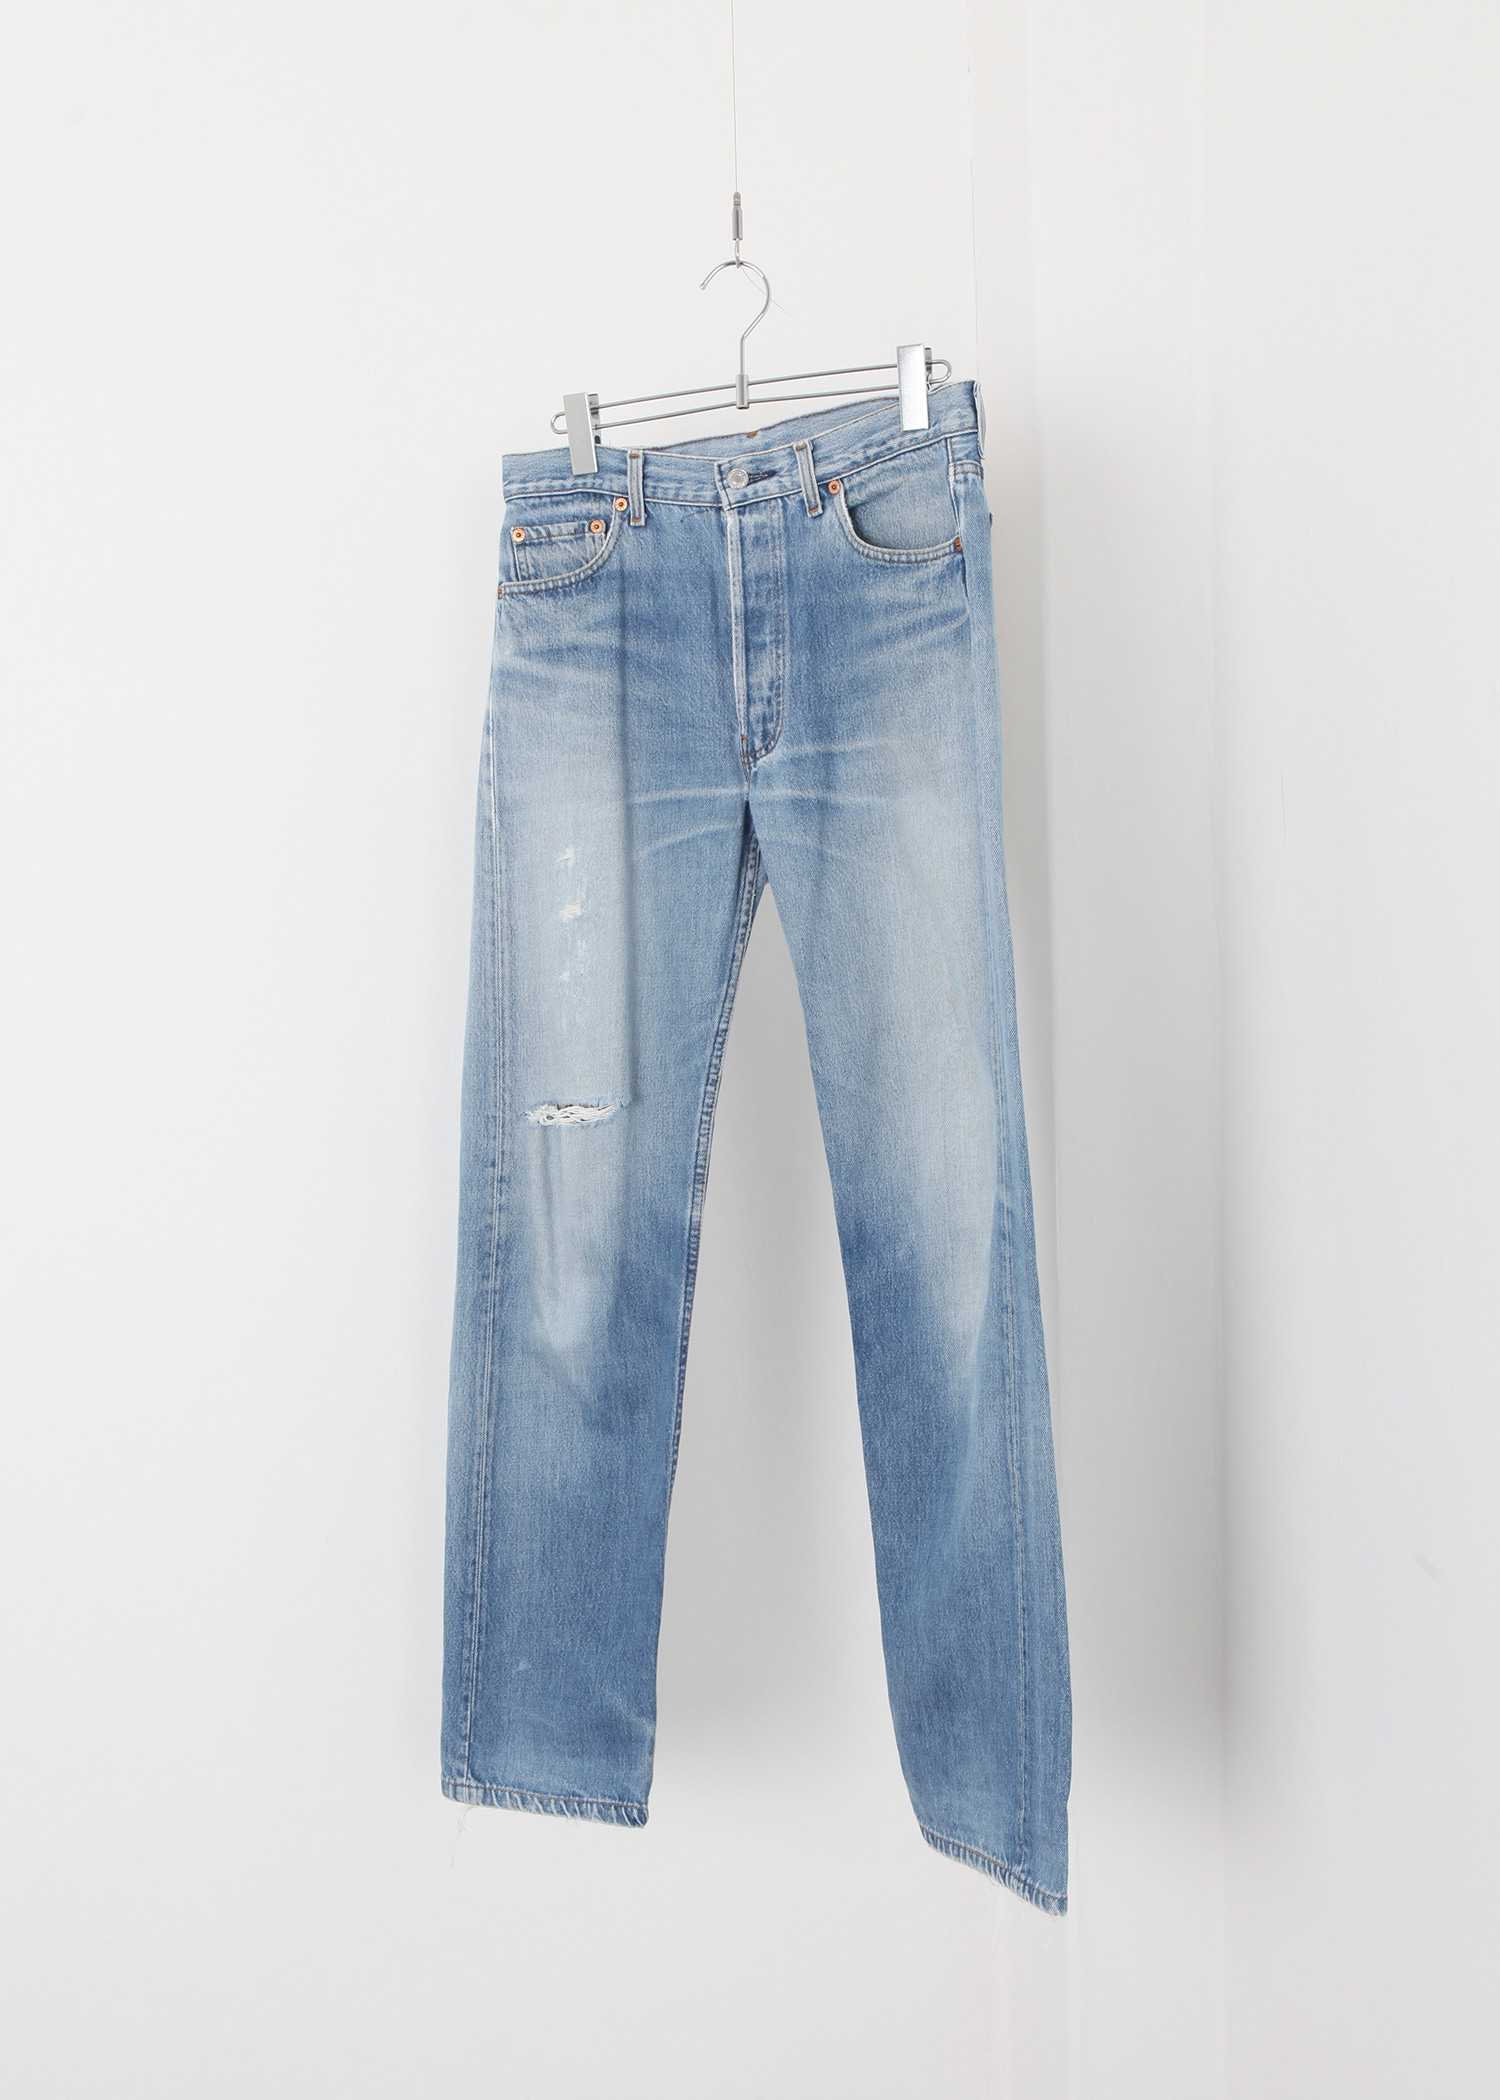 Levis 501 (Made in U.S.A)